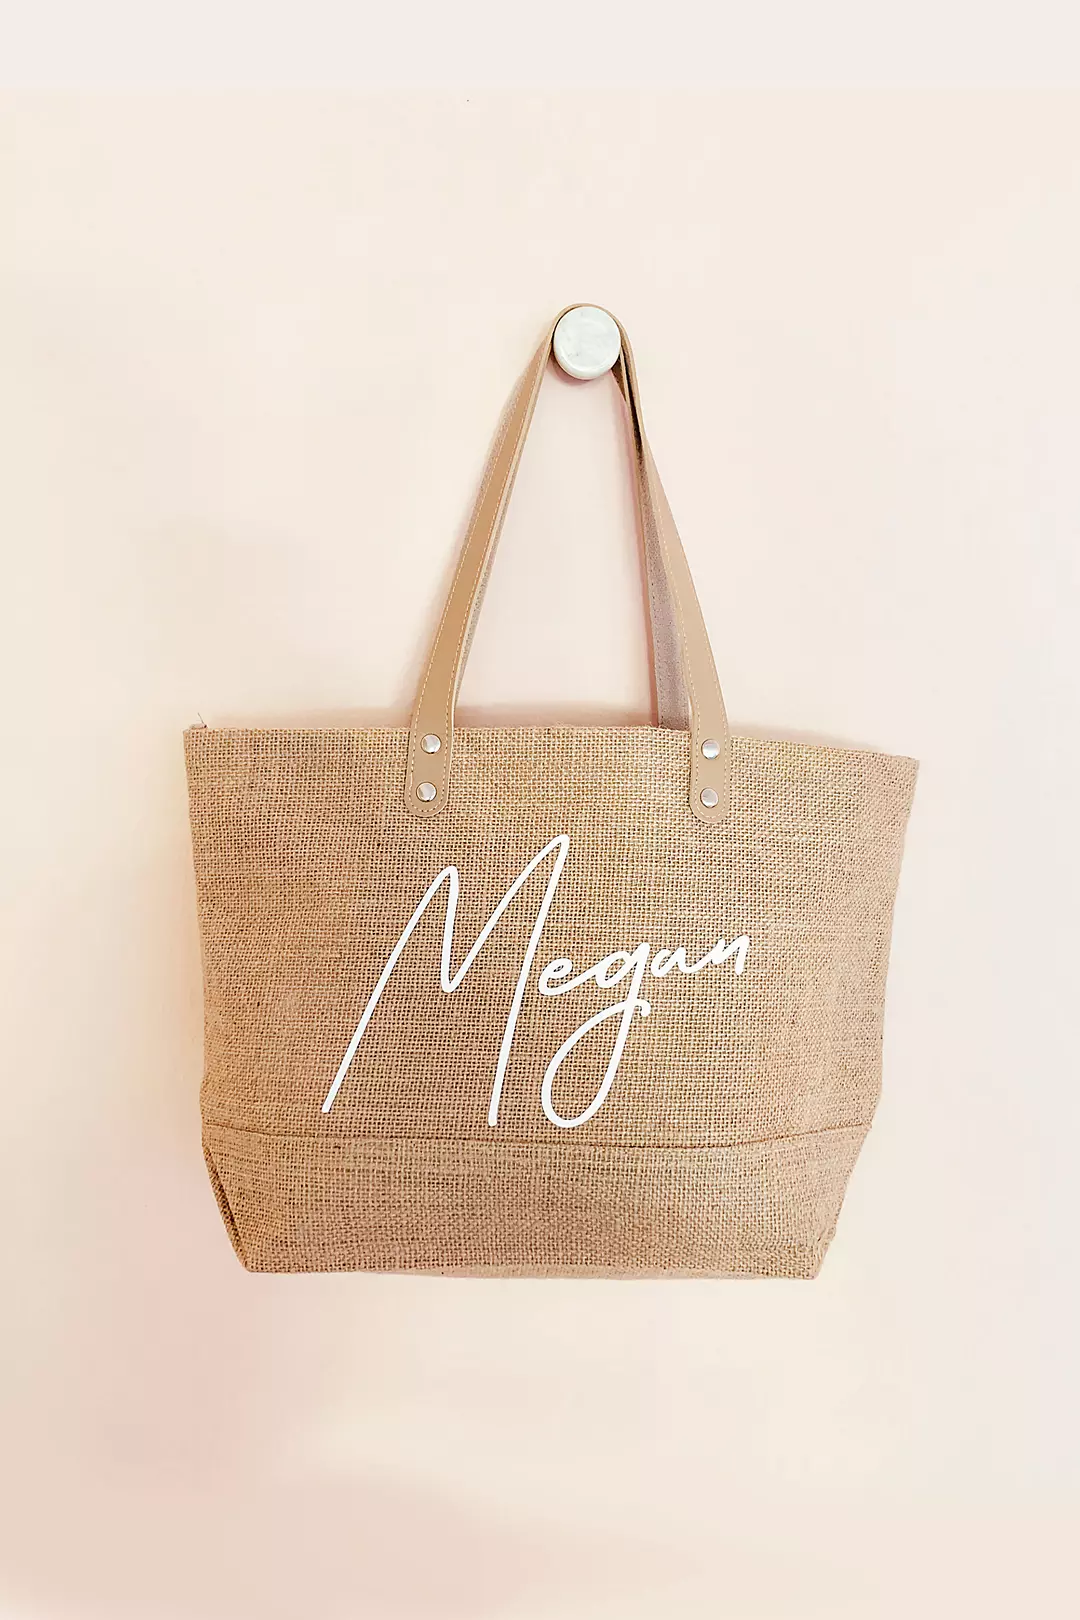 Personalized Jute Canvas Tote Bag with Zipper Image